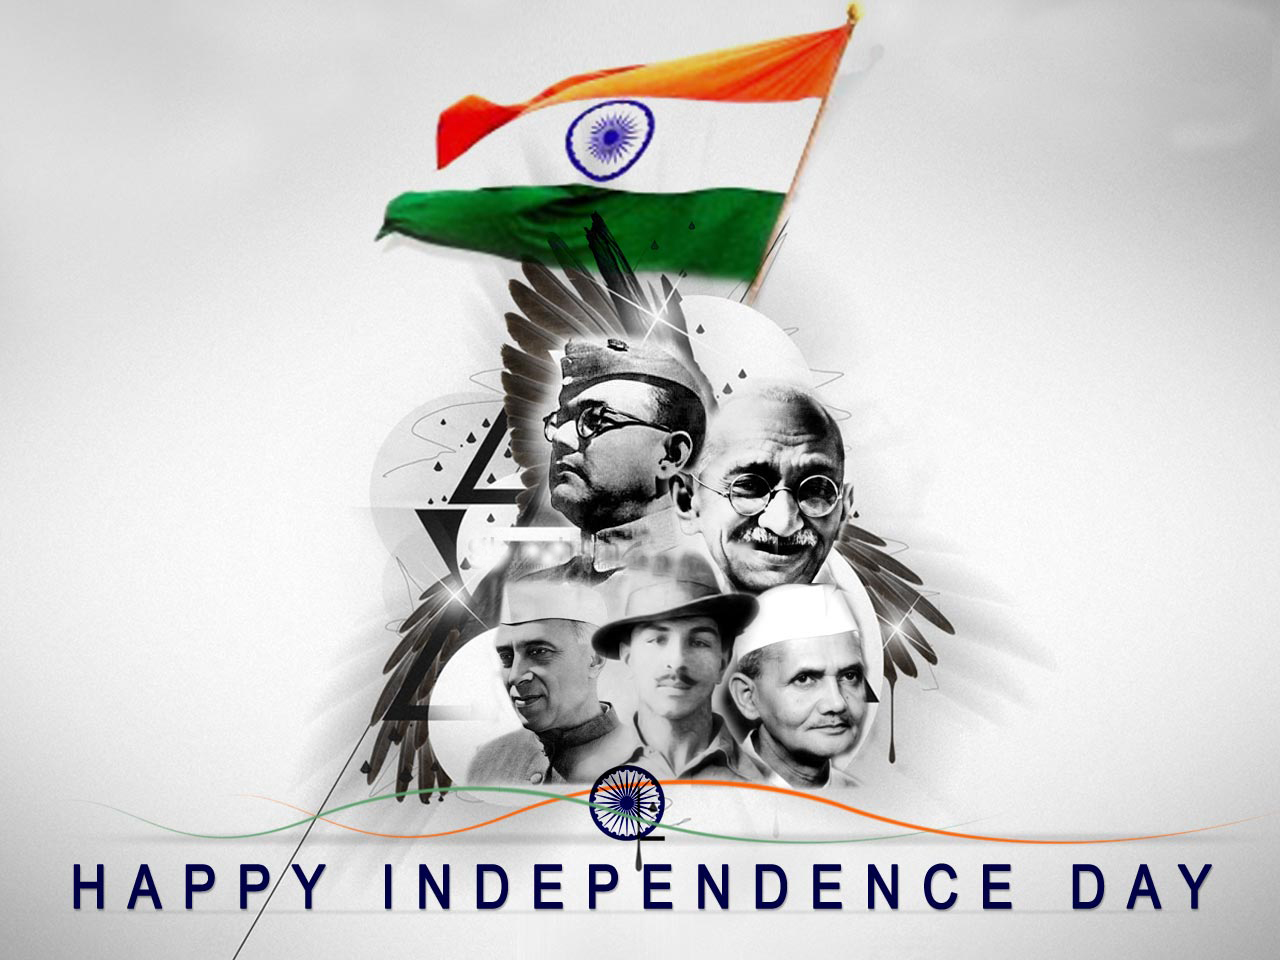 Happy Independence Day 2020 Images, WhatsApp Status and Quotes 3